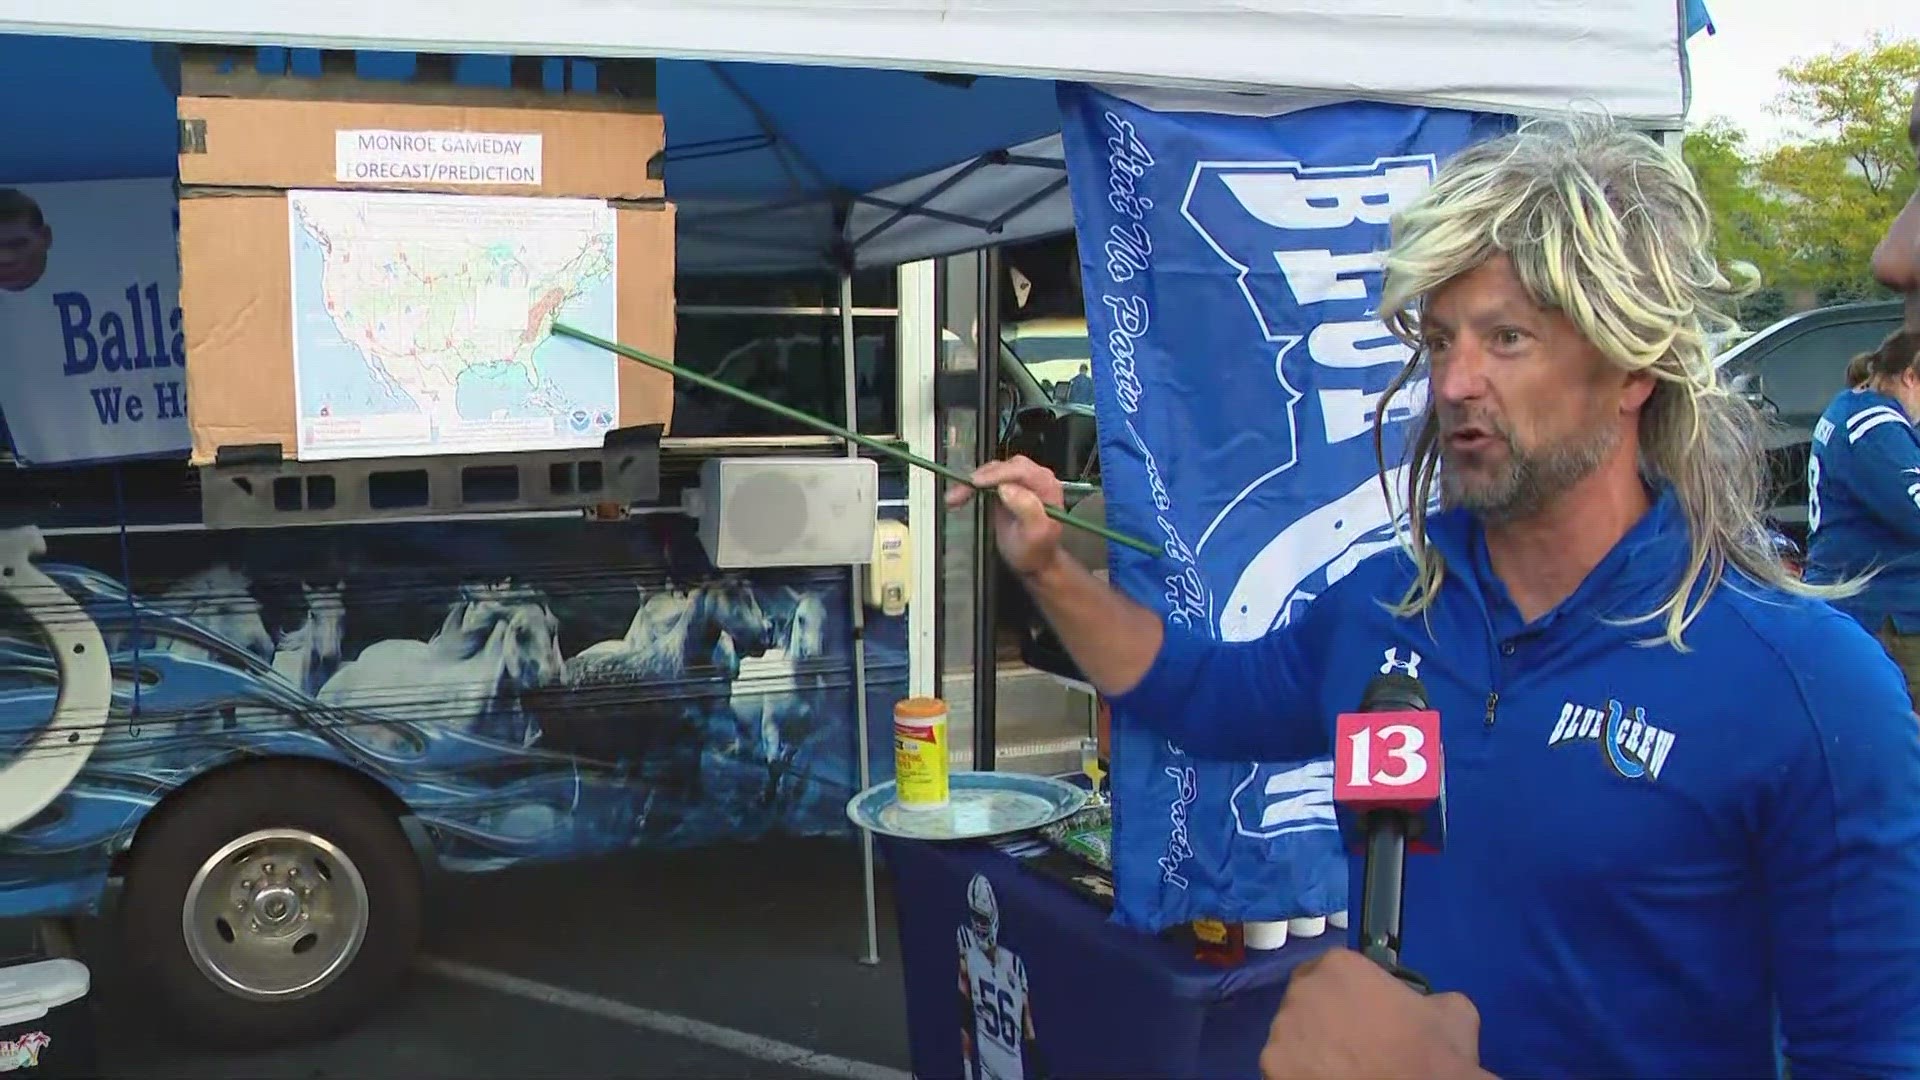 The Blue Crew helps build the hype in the early morning for the Colts home opener against the Jaguars.